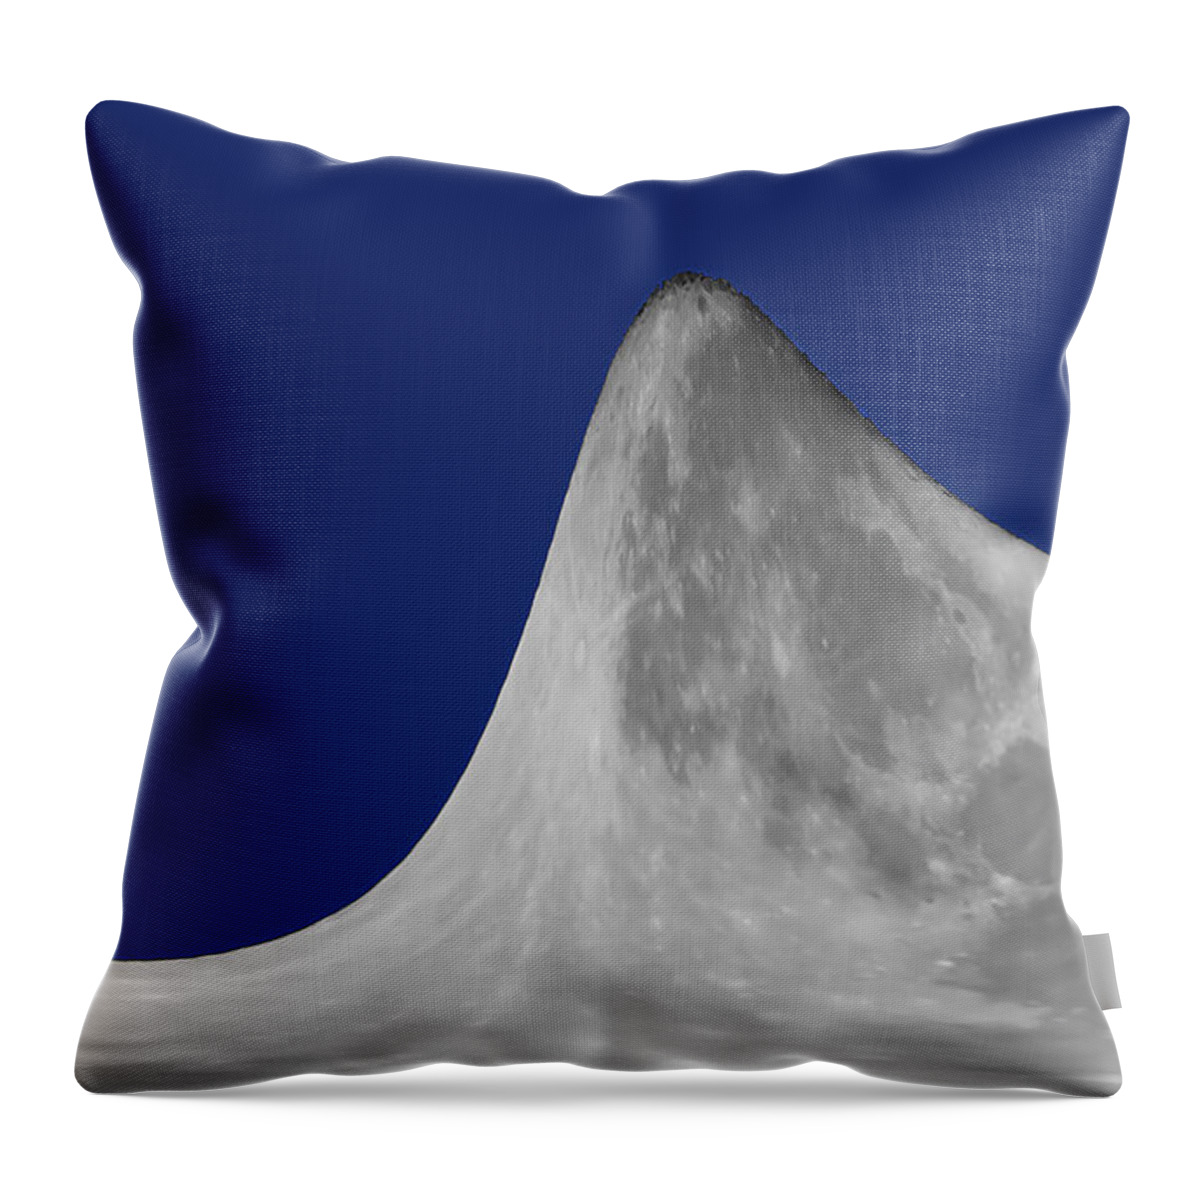 Moon Mountain Throw Pillow featuring the digital art Moon Mountain by Ernest Echols